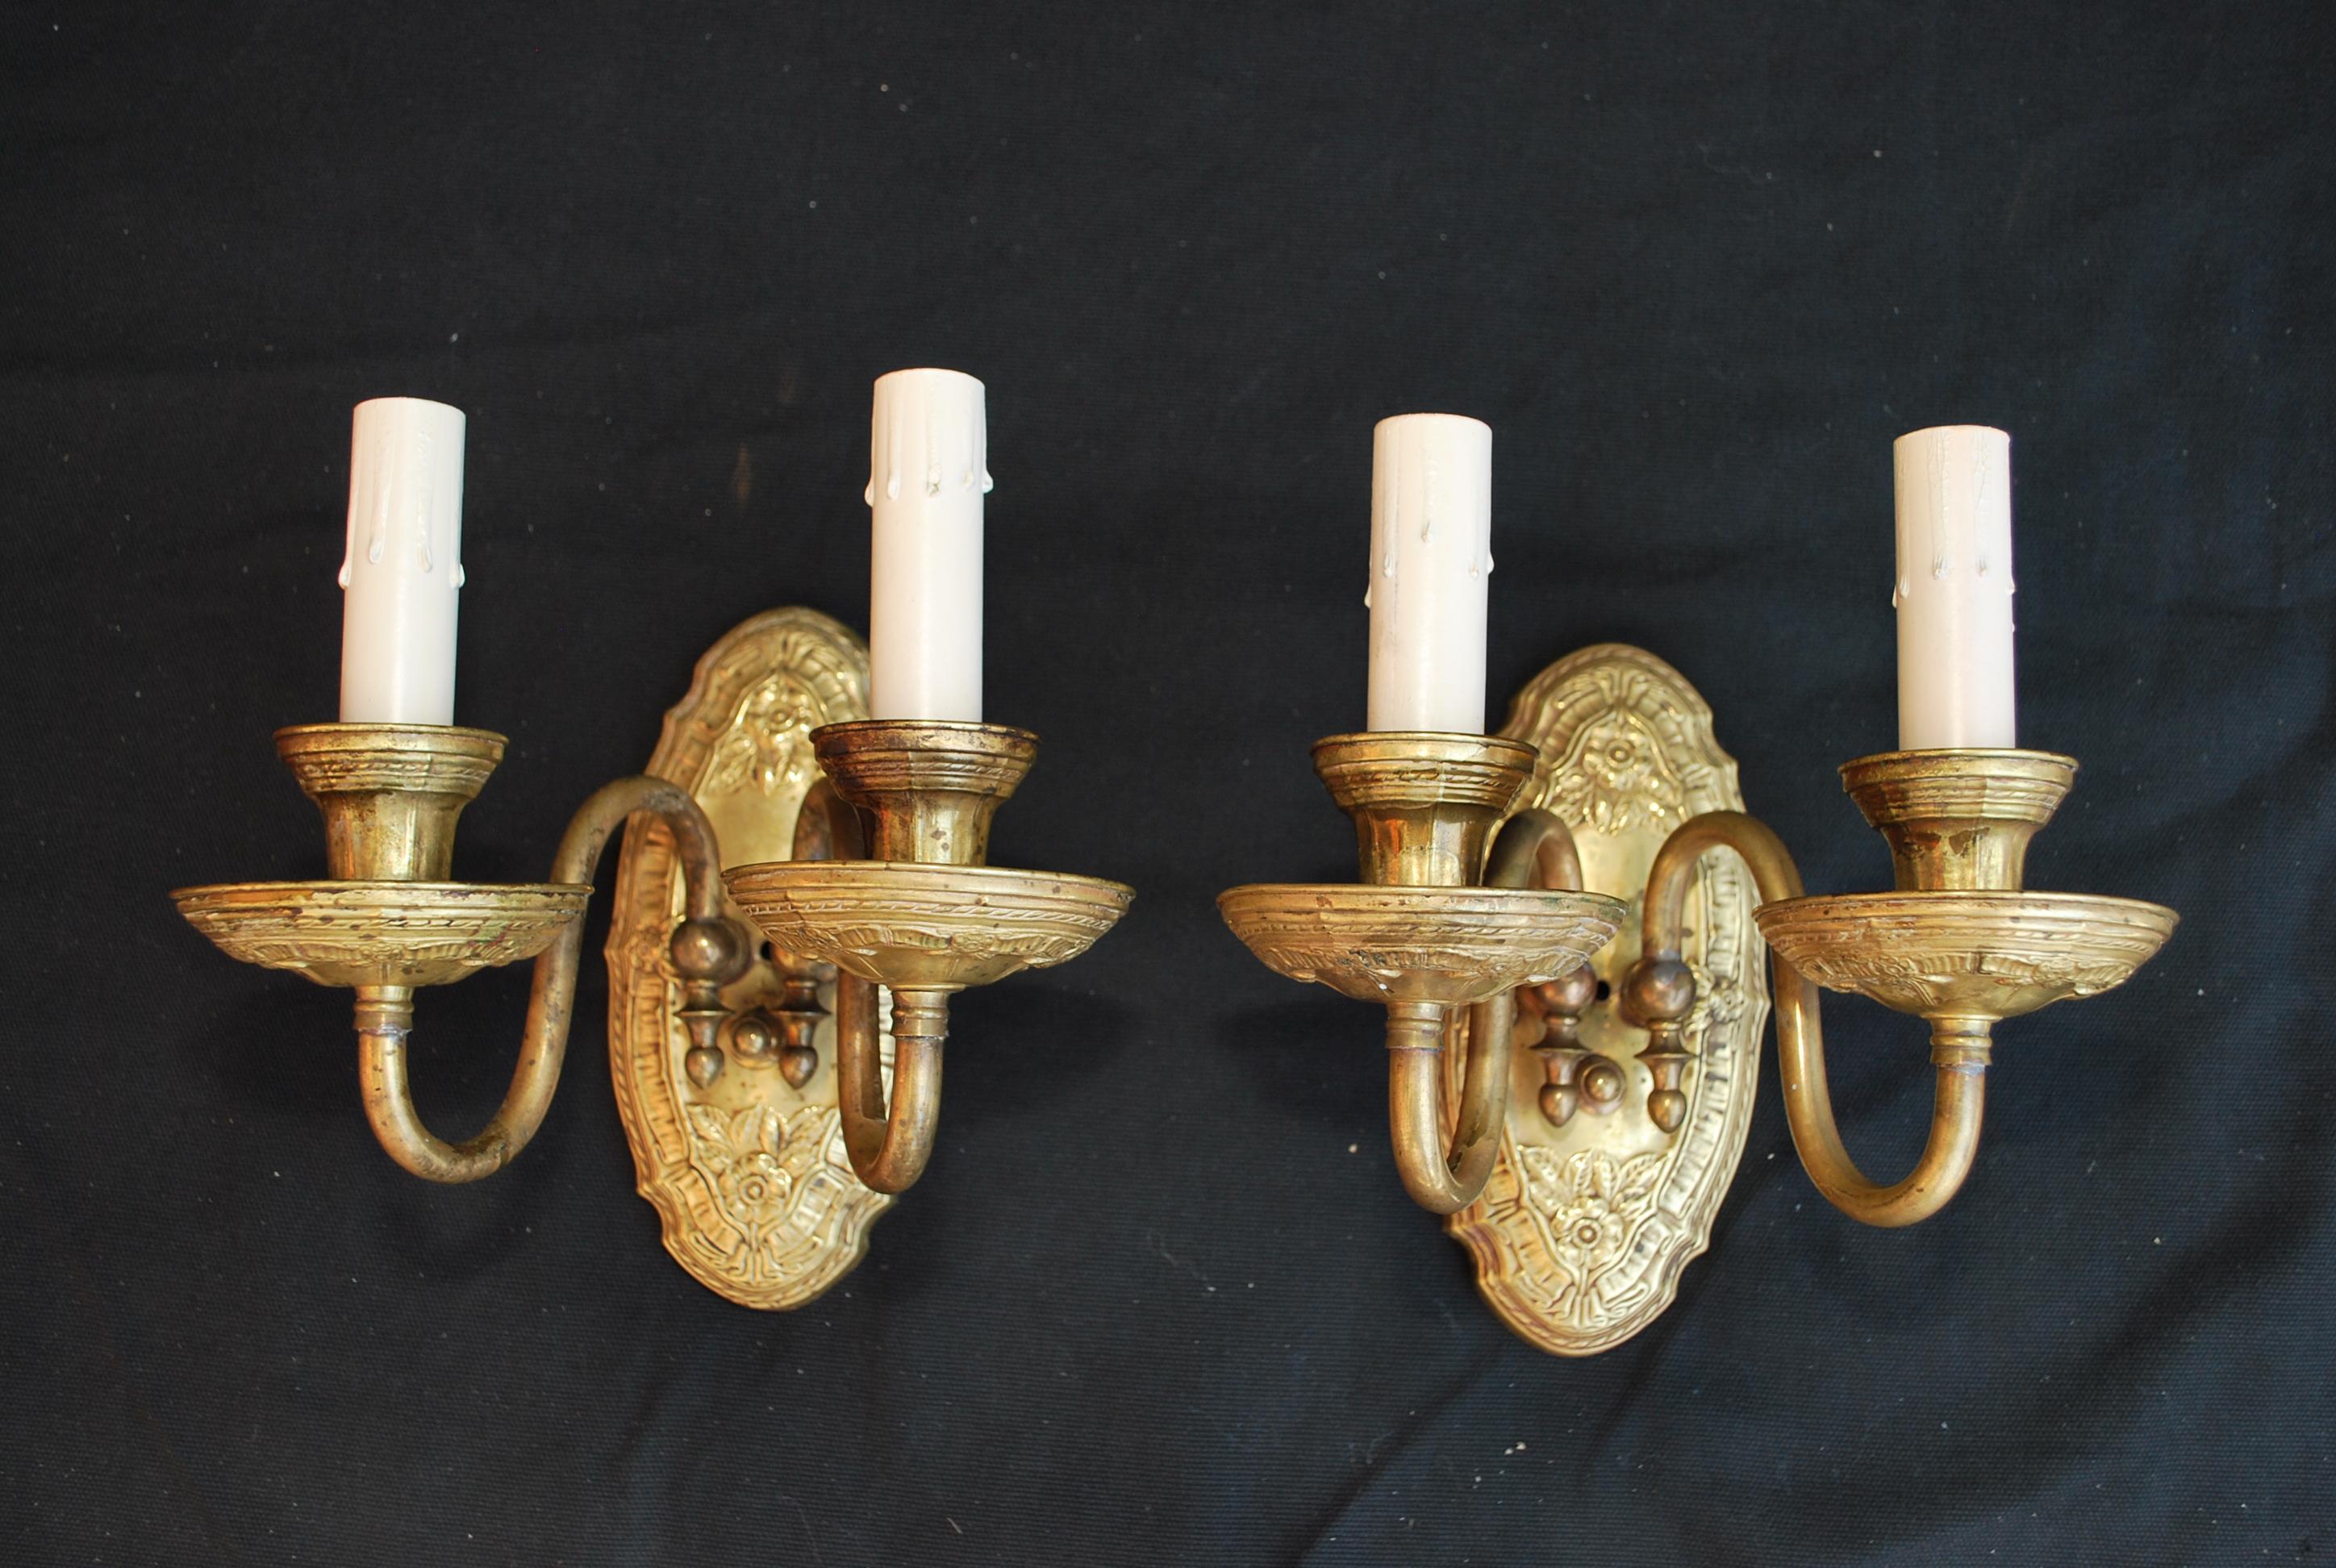 A beautiful pair of 1920s Brass sconces the patina is much nicer in person, the details are amazing.